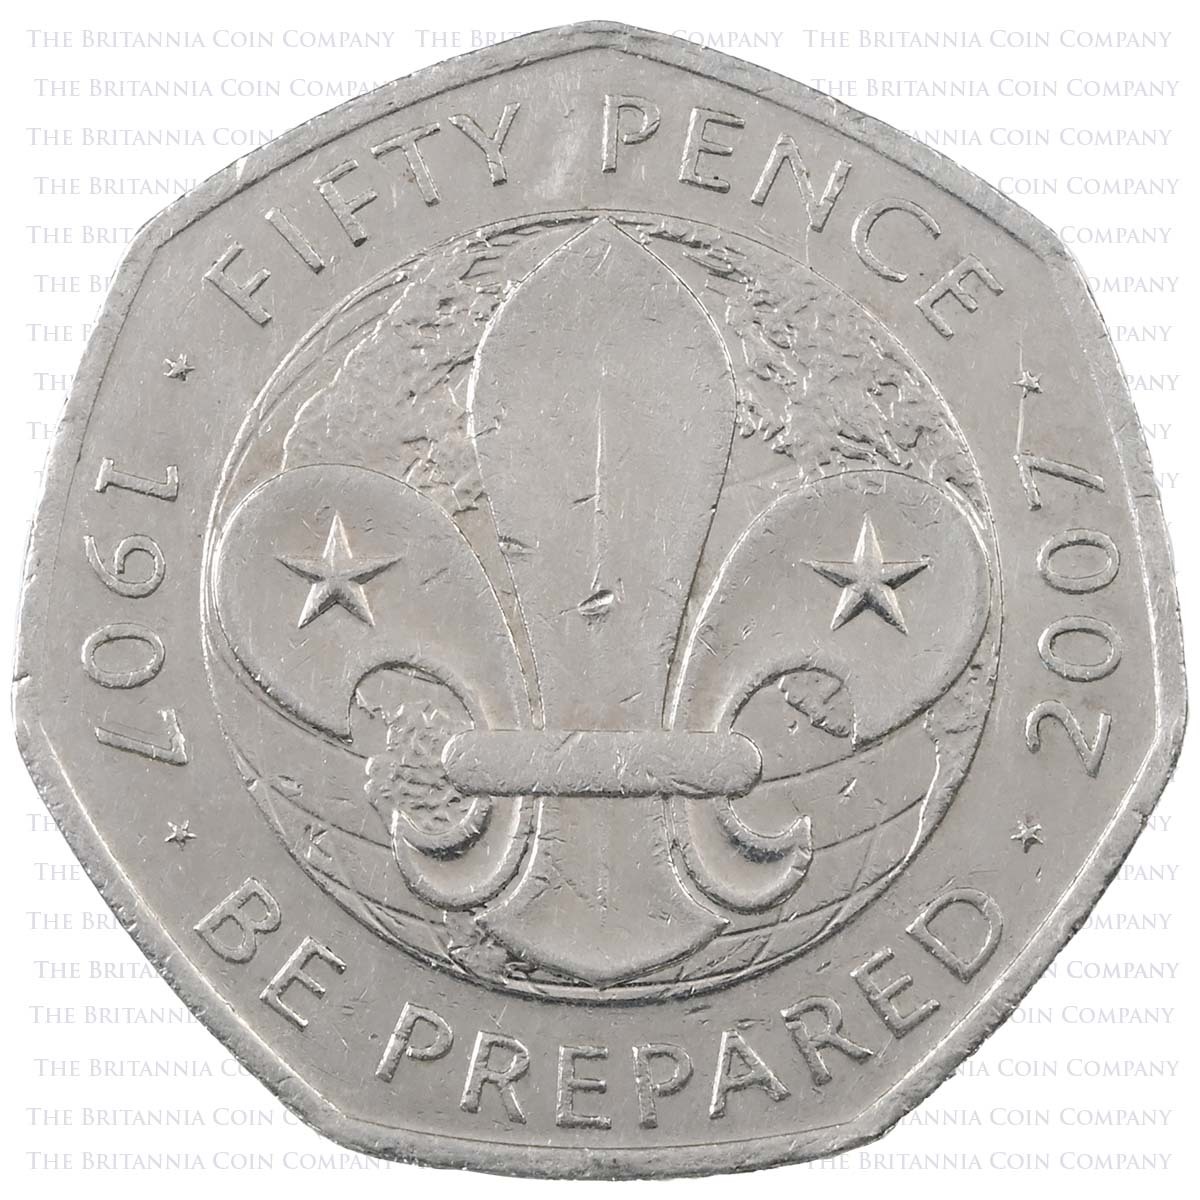 2007 Boy Scouting Be Prepared Circulated Fifty Pence Coin Reverse